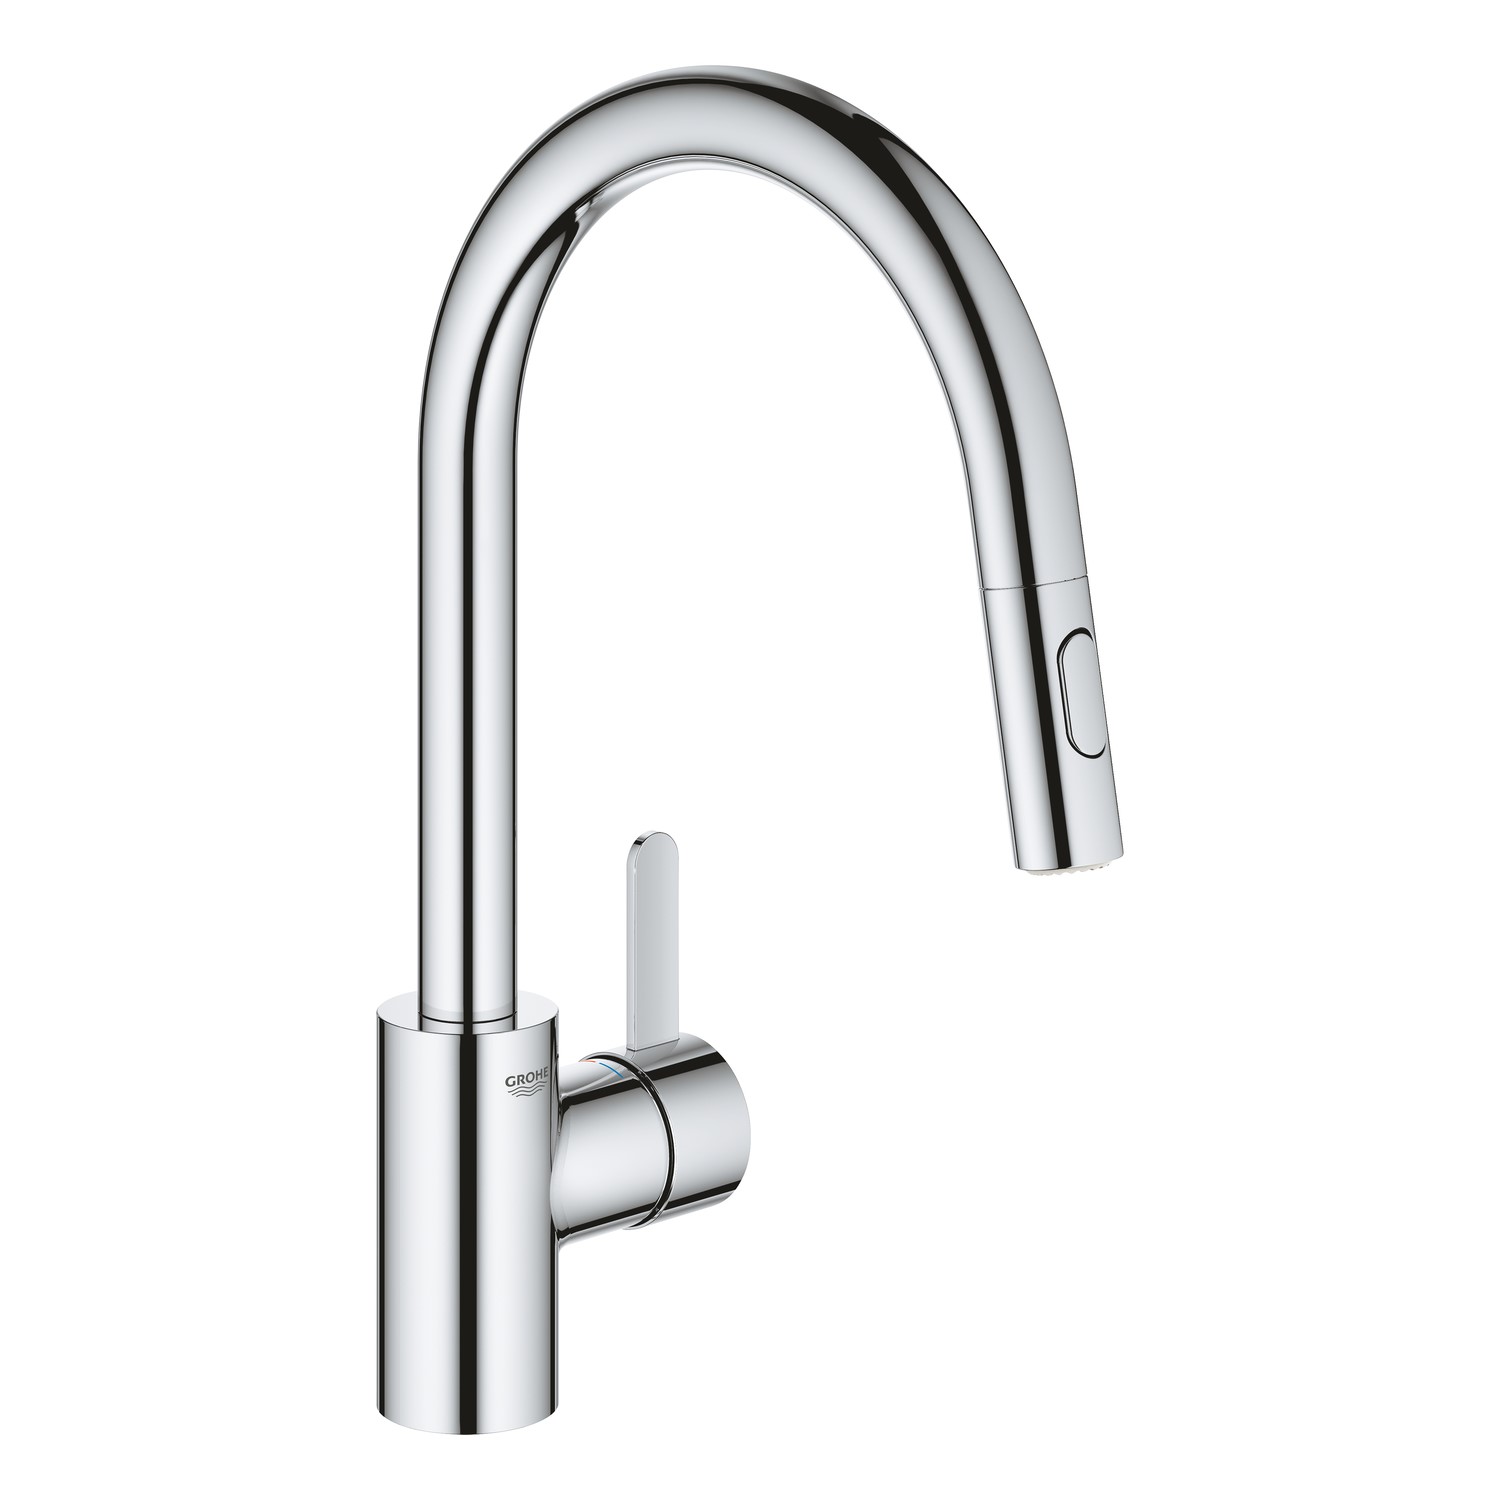 C & L Clyro Polished Chrome Concealed Pull Out Tap 